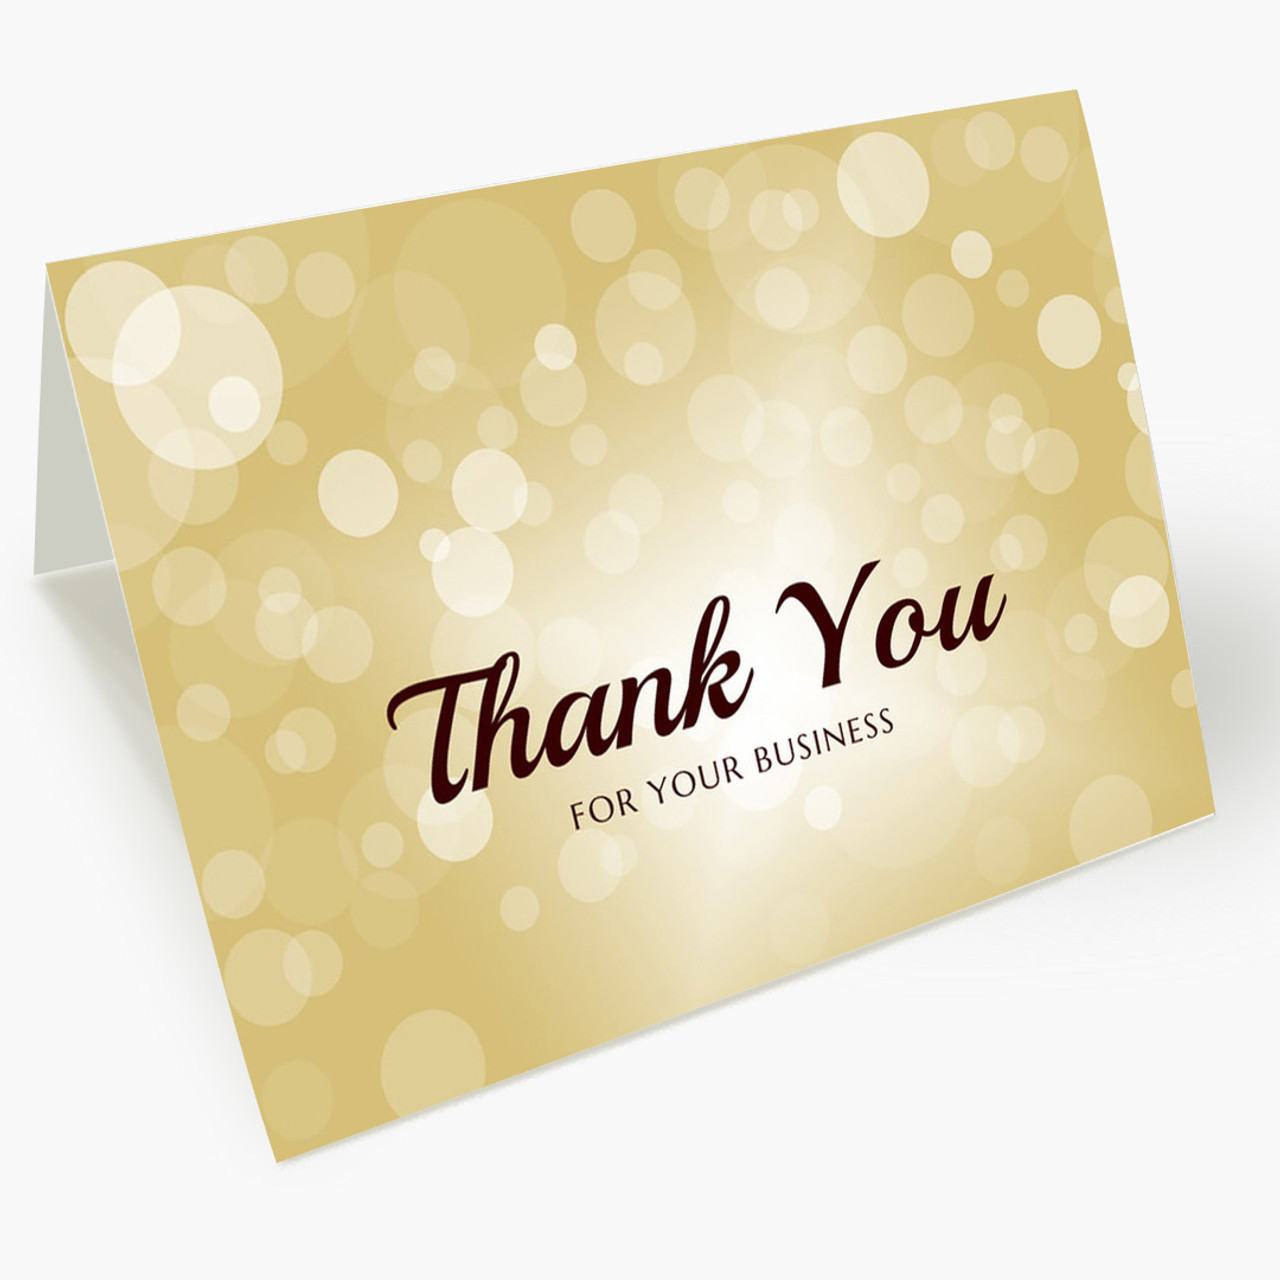 For Your Business Thank You Card